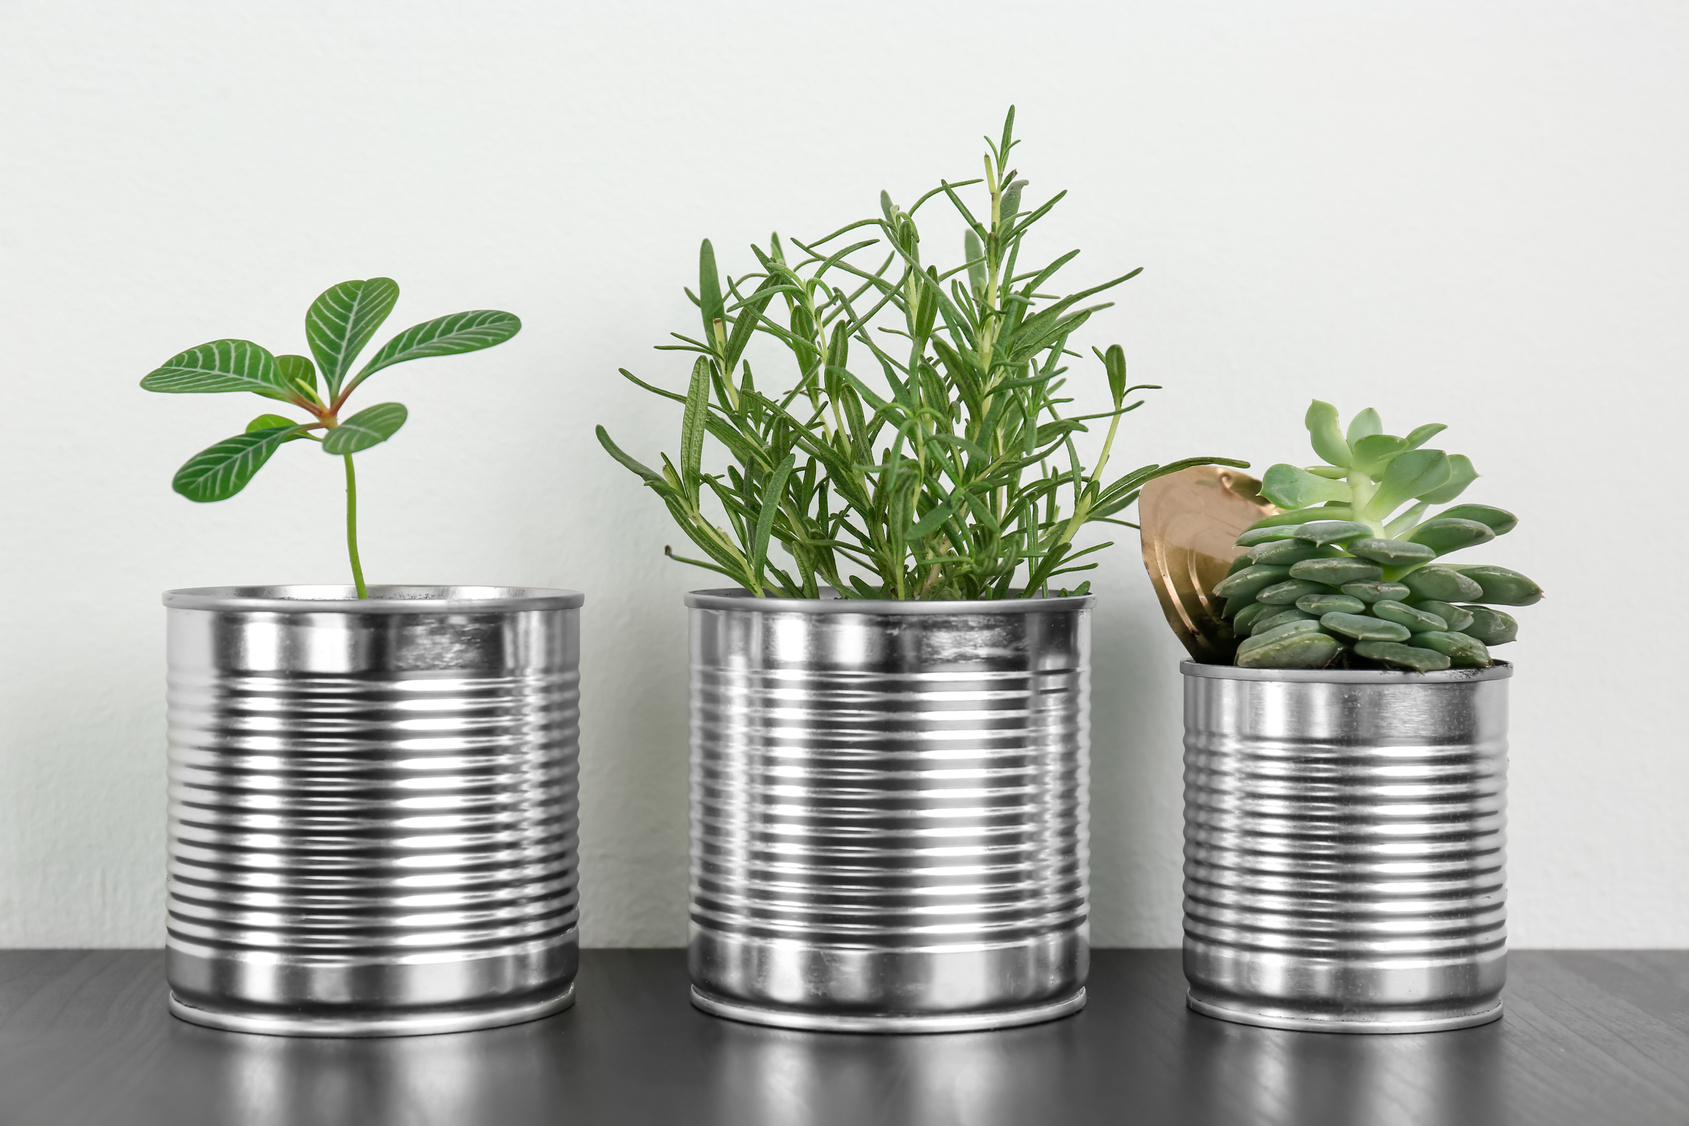 Plants in Aluminum Cans